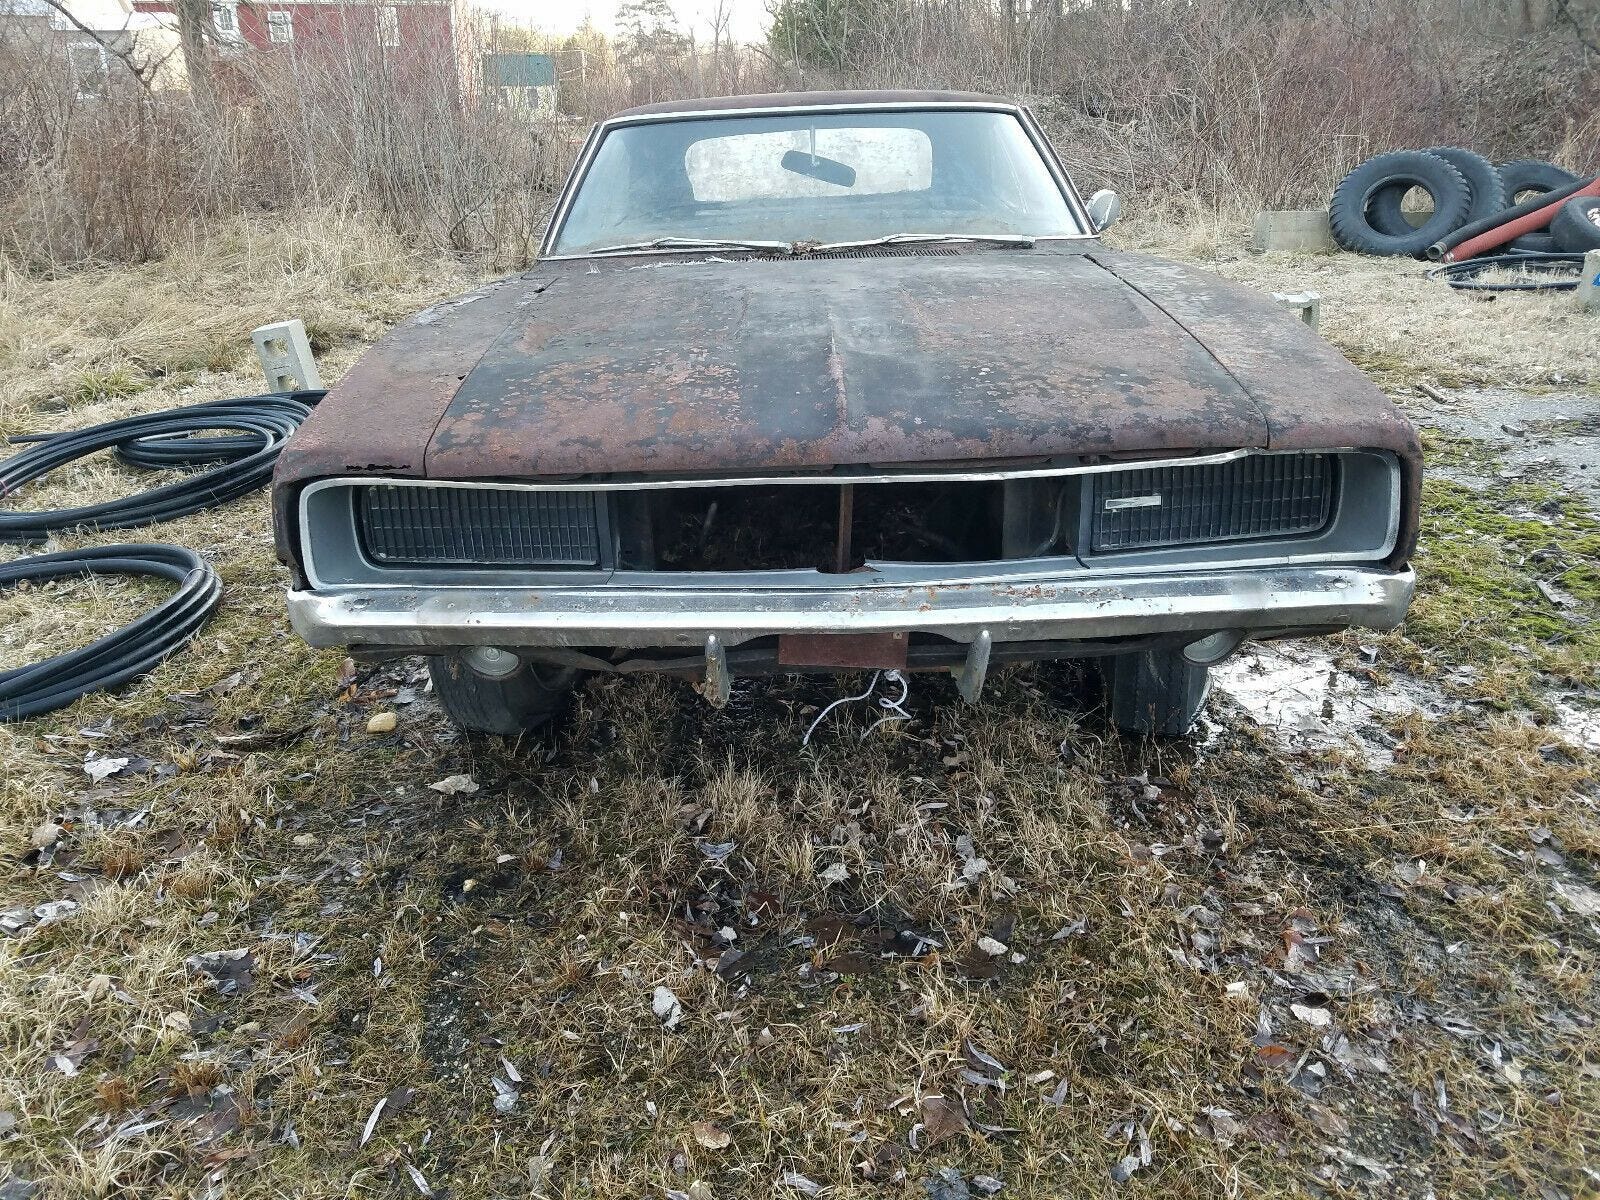 Rusty Project 68 Charger Tells A Story By Sam Maven Motorious Medium